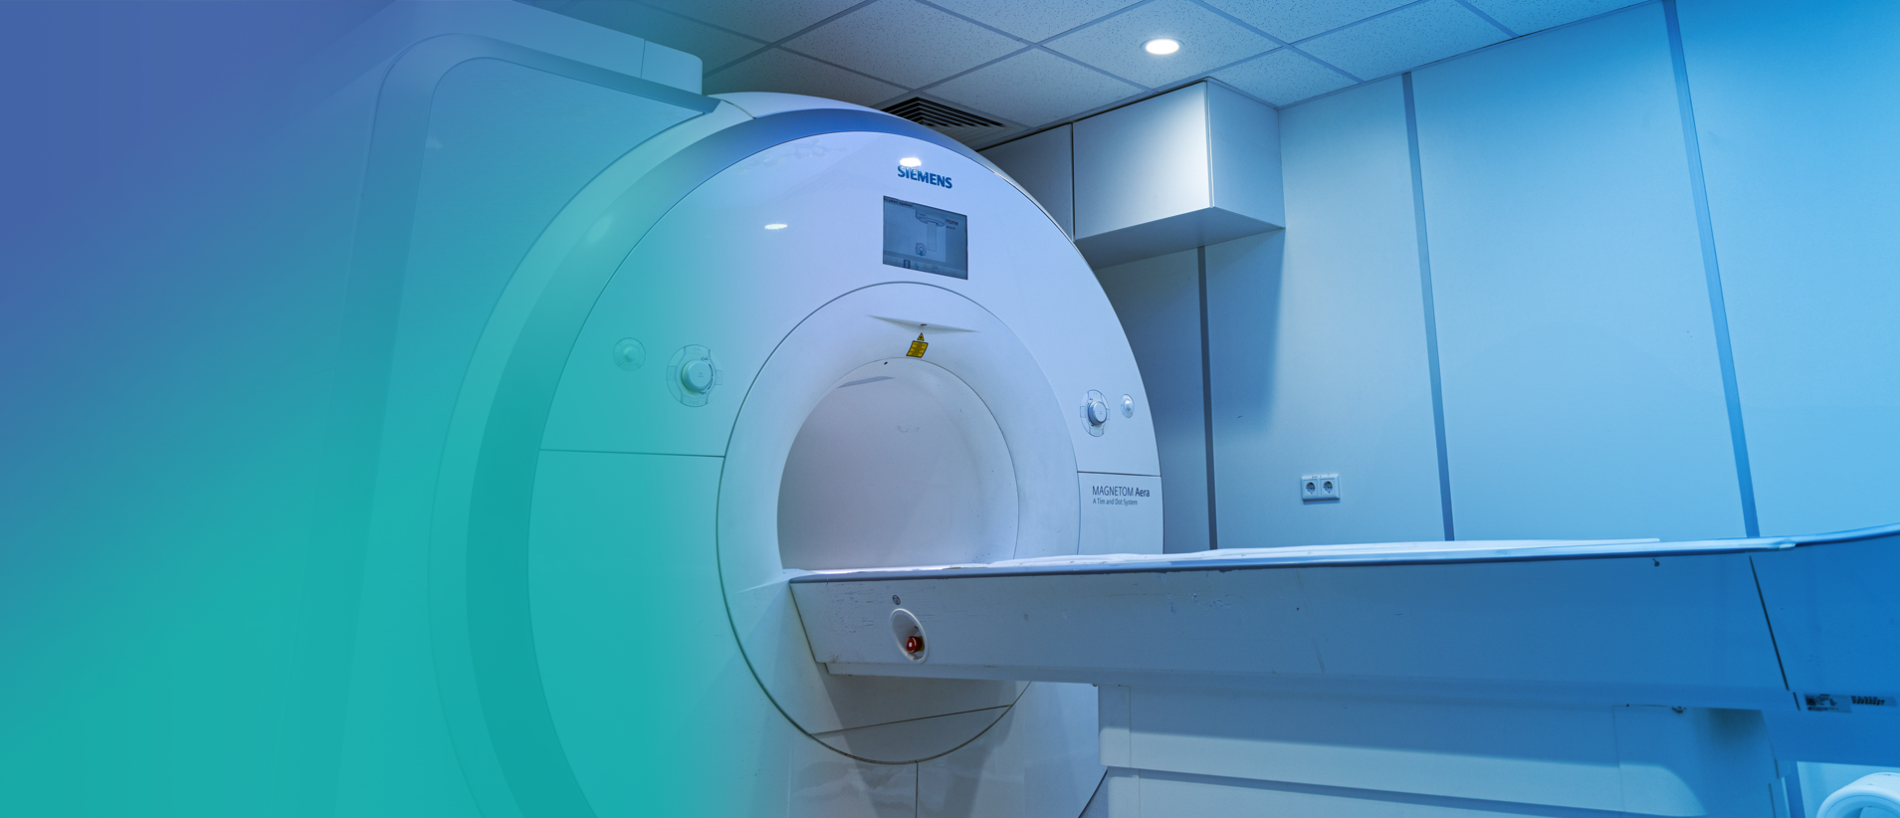 MRI scans are now available!